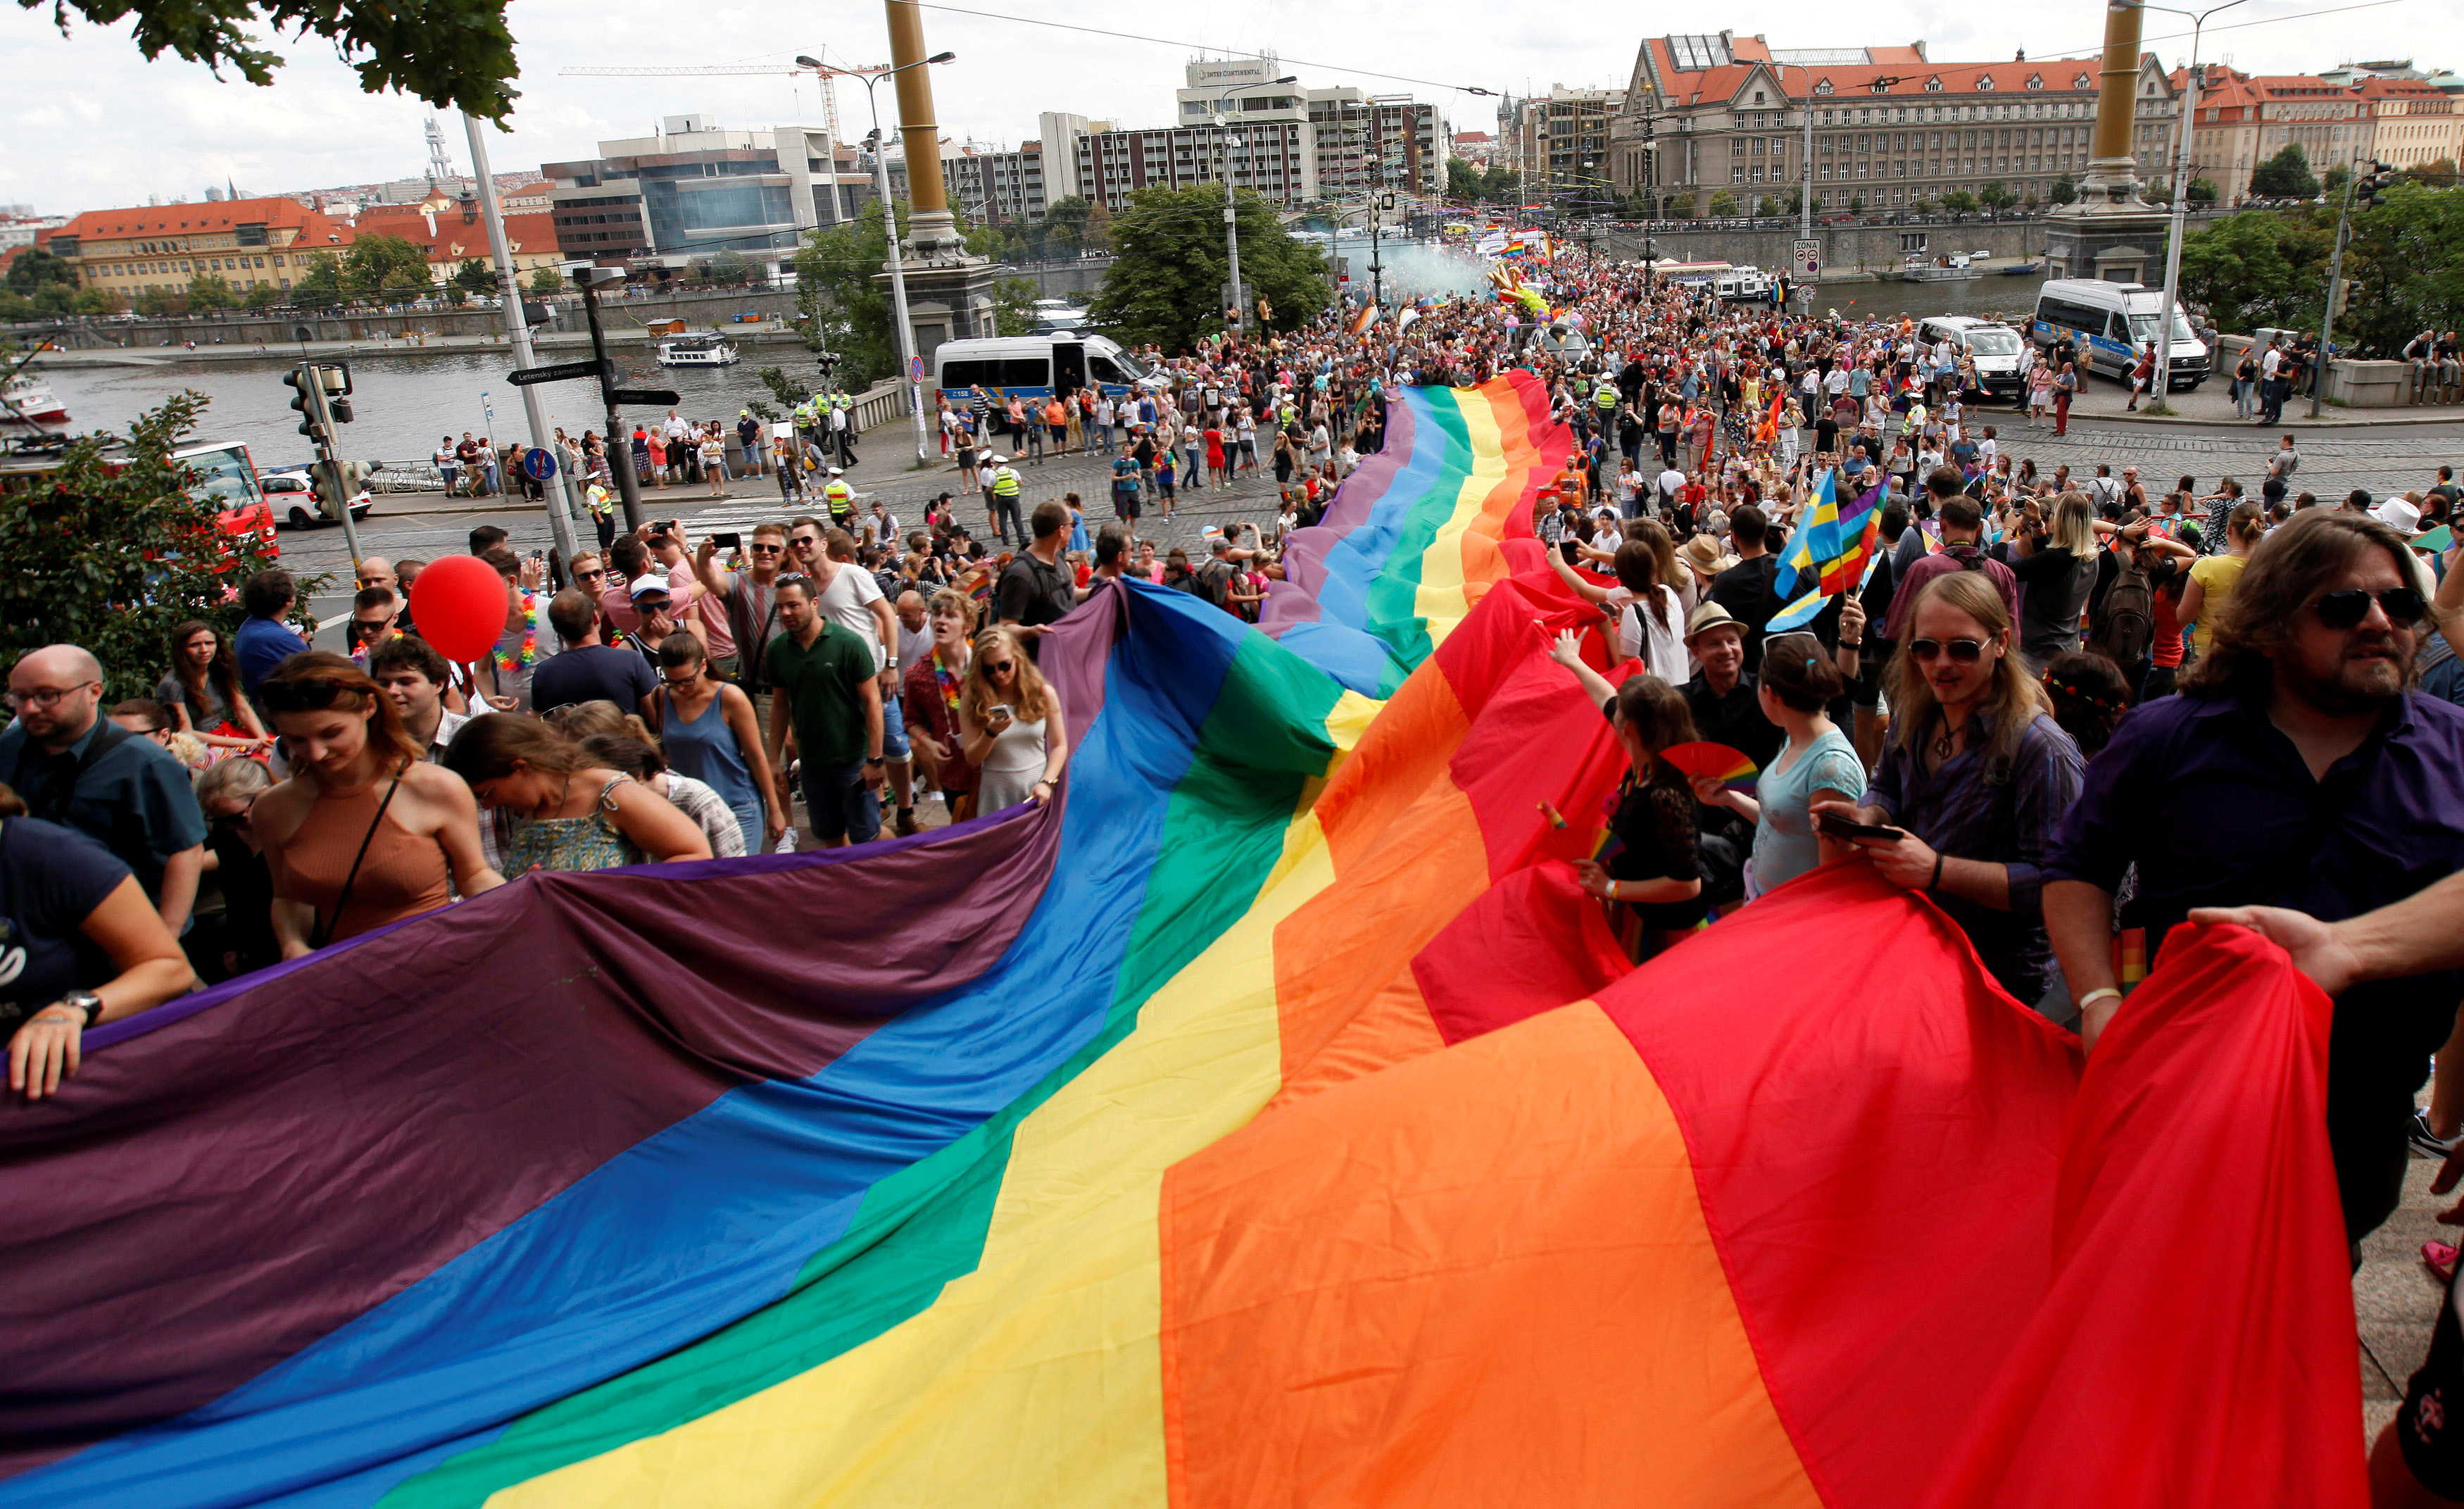 Participants hold a giant rainbow flag during the Prague Pride Parade where thousands marched through the city centre in support of gay rights, in Czech Republic